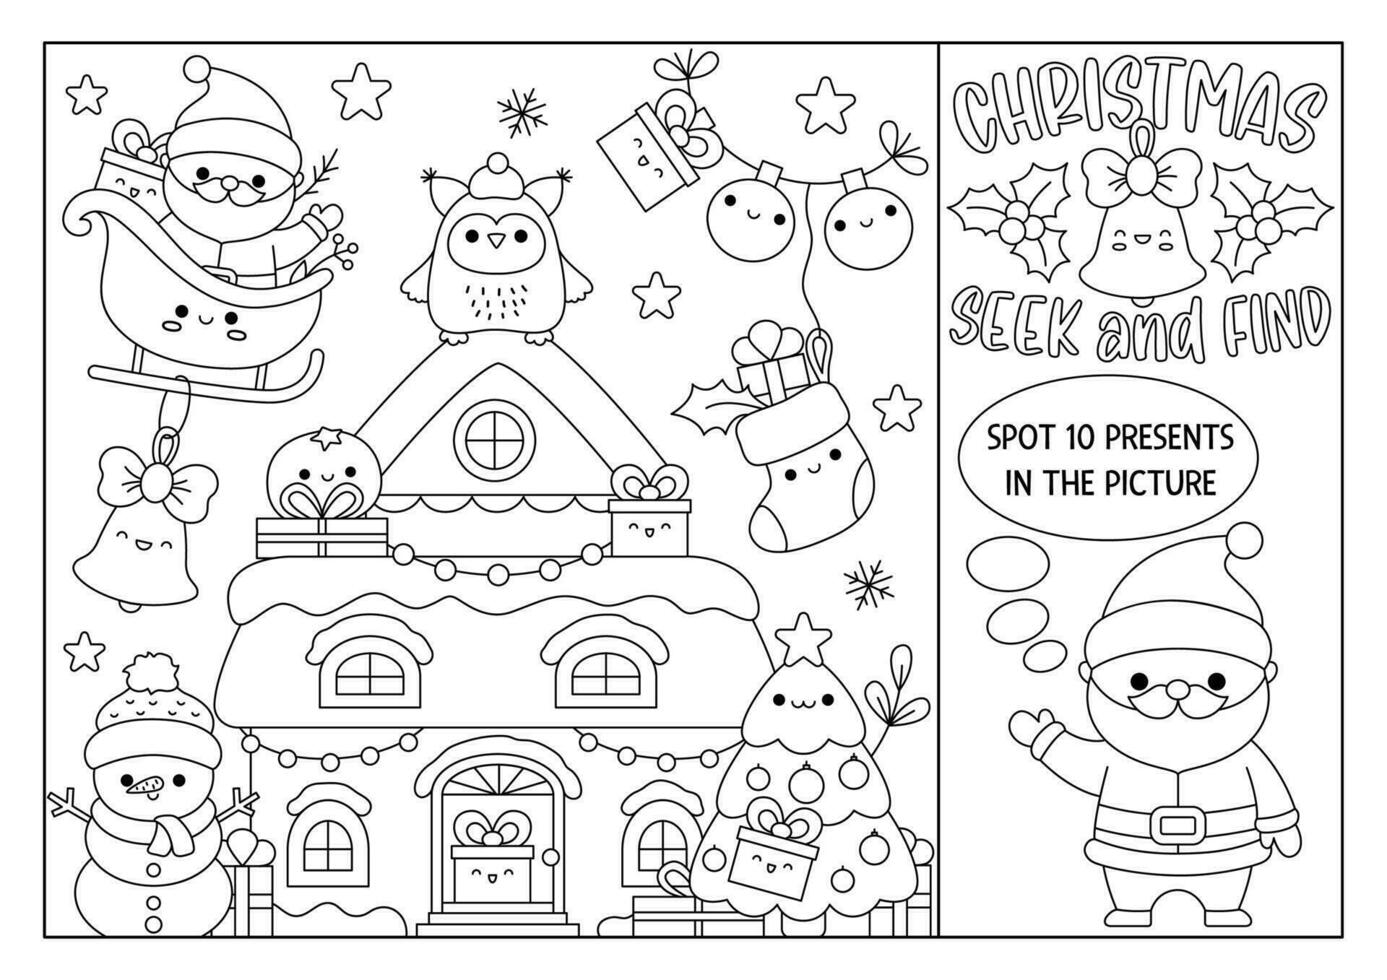 Vector Christmas black and white searching line game with decorated house and kawaii characters. Spot hidden presents in the picture. Simple winter holiday seek and find coloring page